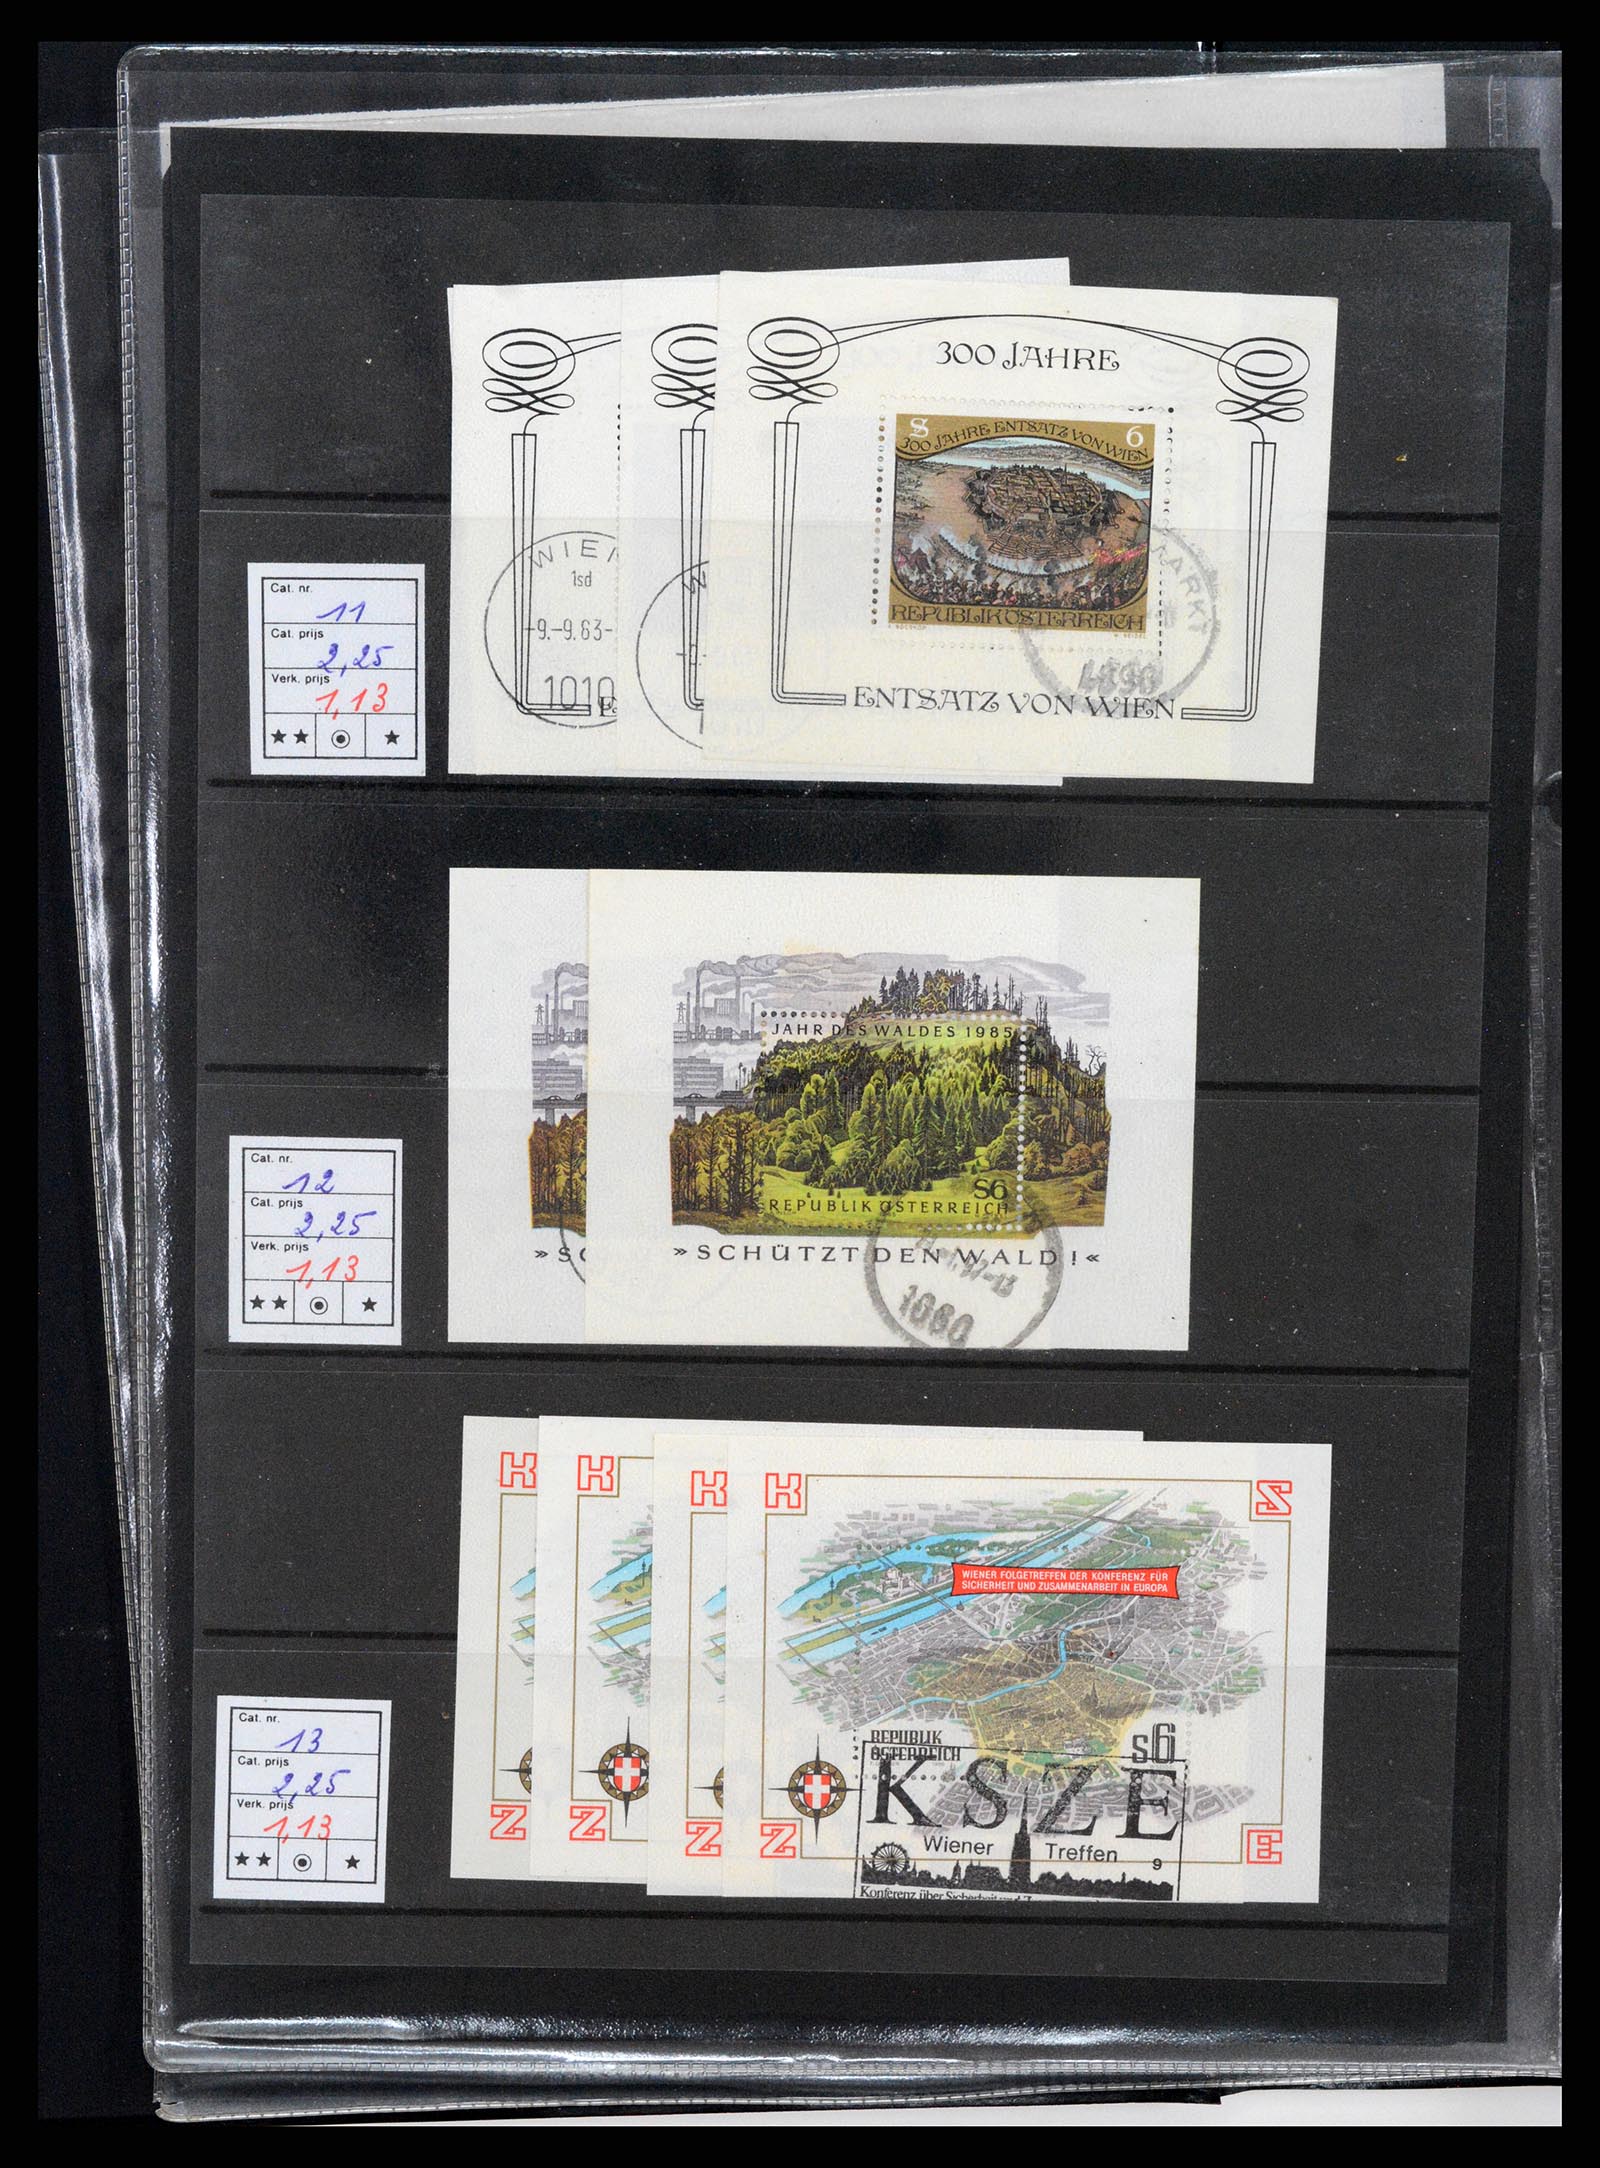 37192 093 - Stamp collection 37192 European countries souvenir sheets and booklets 1